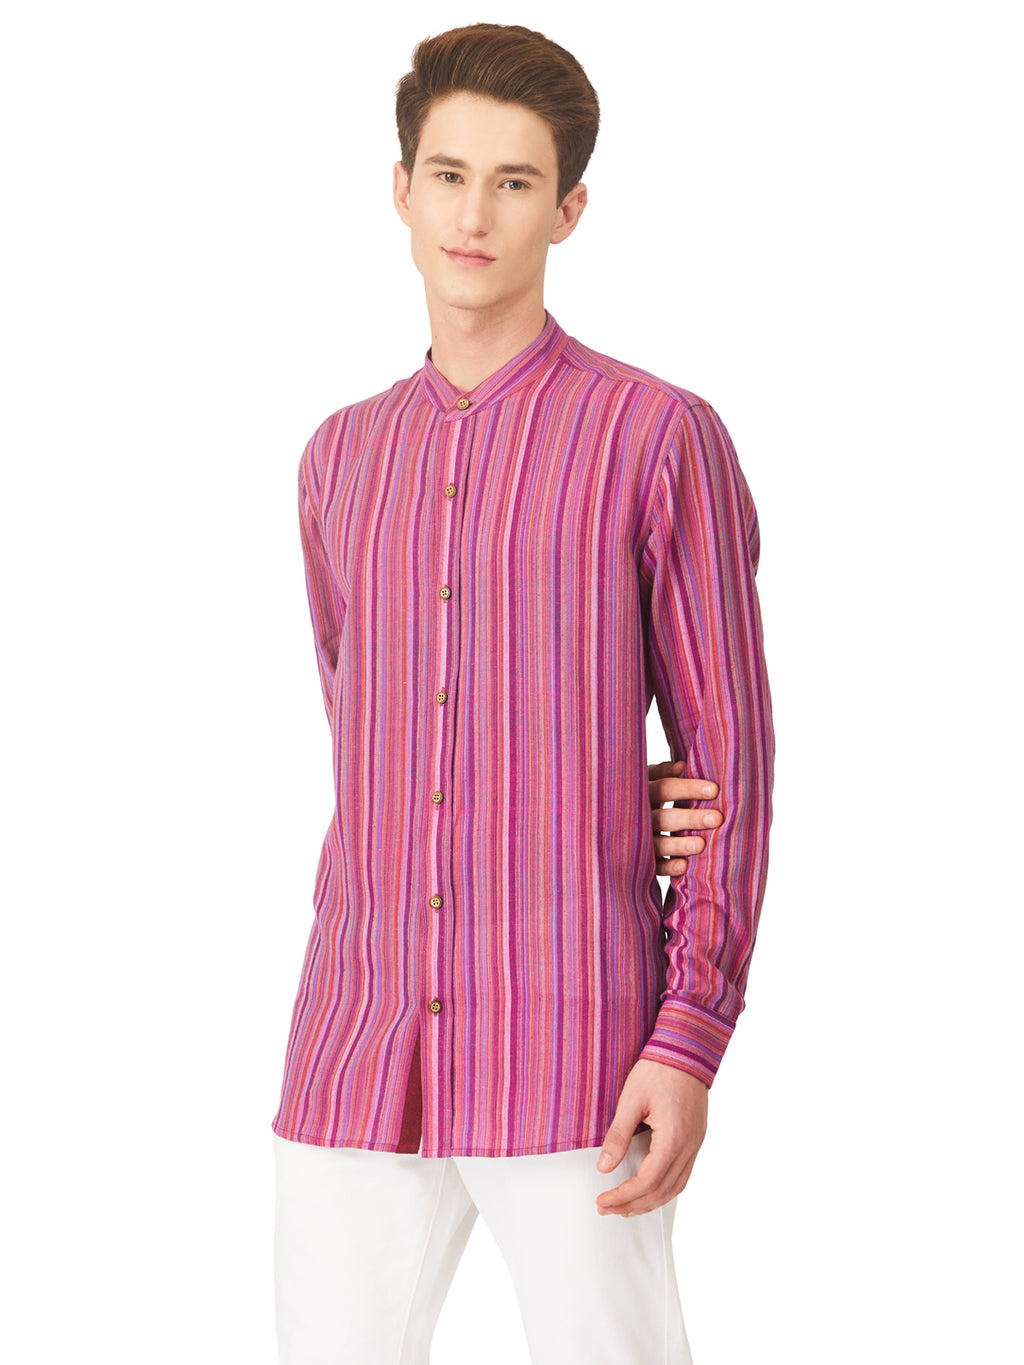 Textured Soft Handloom Shirt With Bold Stripes In Purple Look